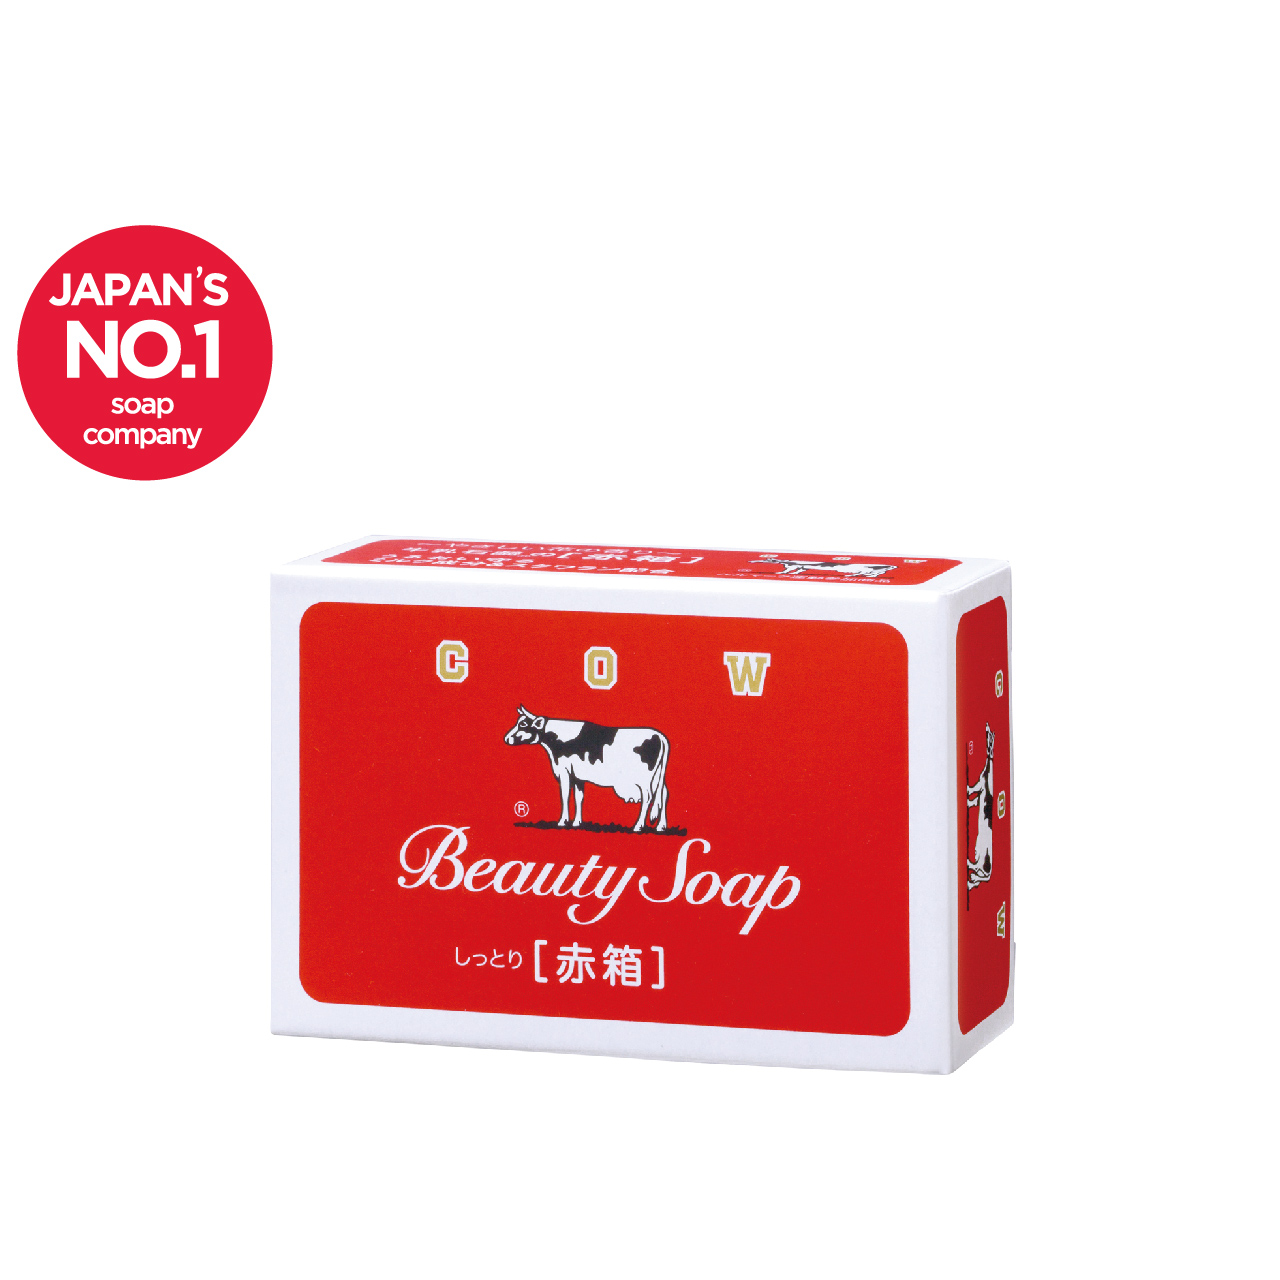 Cow Brand Beauty Soap (Red Box)